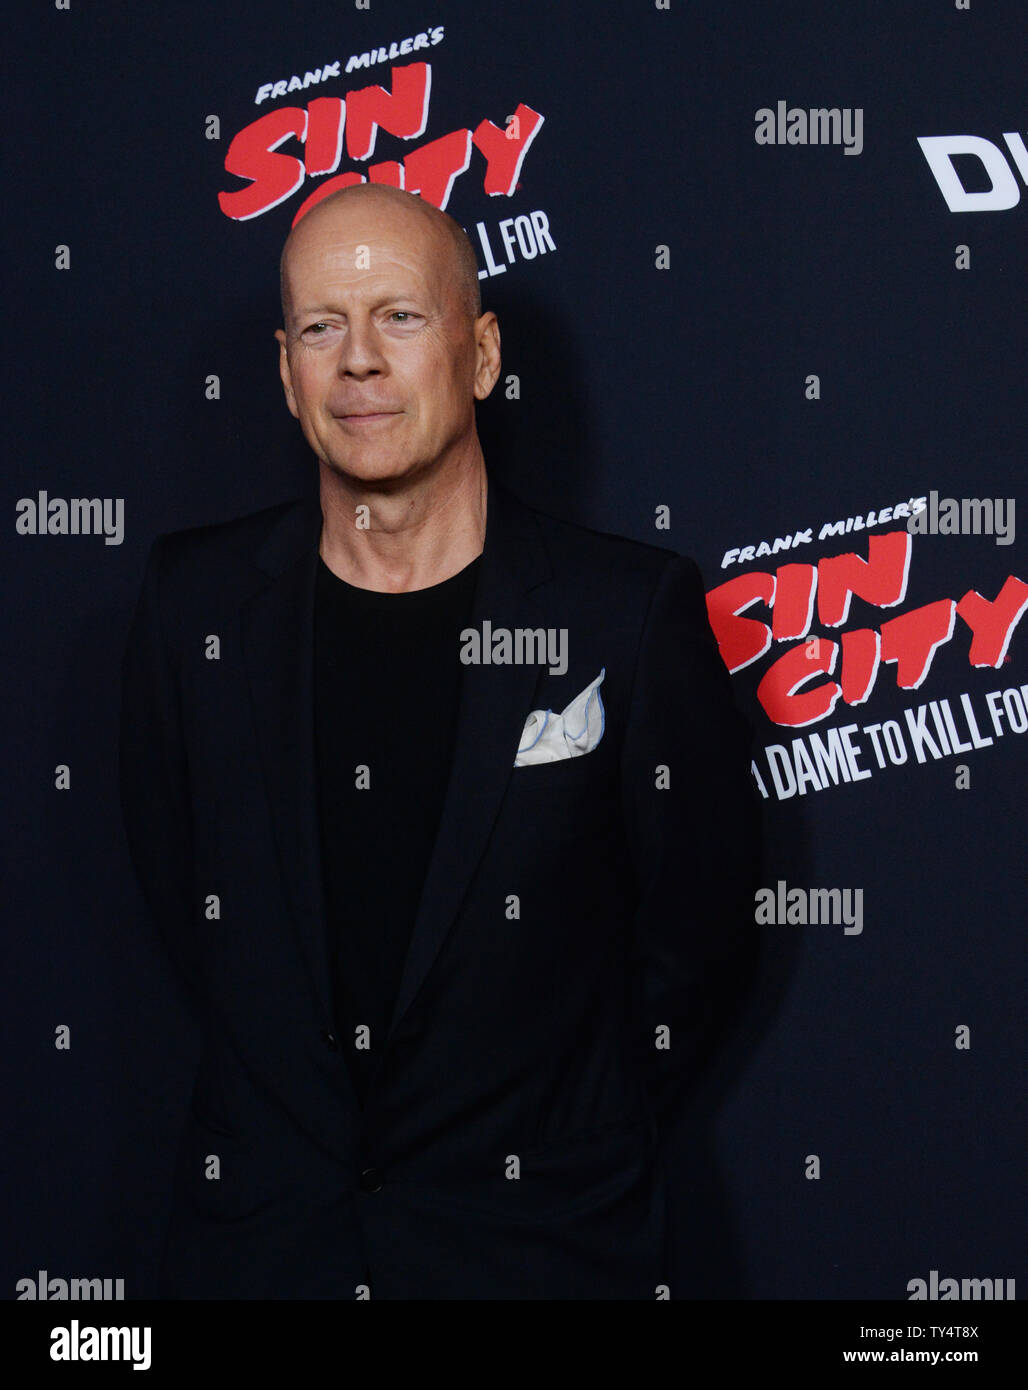 Cast member Bruce Willis attends the premiere of the motion picture crime thriller 'Sin City: A Dame to Kill For' attends the premiere of the film at TCL Chinese Theatre in the Hollywood section of Los Angeles on August 19, 2014. Storyline: Co-directors Robert Rodriguez and Frank Miller reunite to bring Miller's 'Sin City' graphic novels back to the screen. Weaving together two of Miller's classic stories with new tales, the town's most hard boiled citizens cross paths with some of its more notorious inhabitants.   UPI/Jim Ruymen Stock Photo